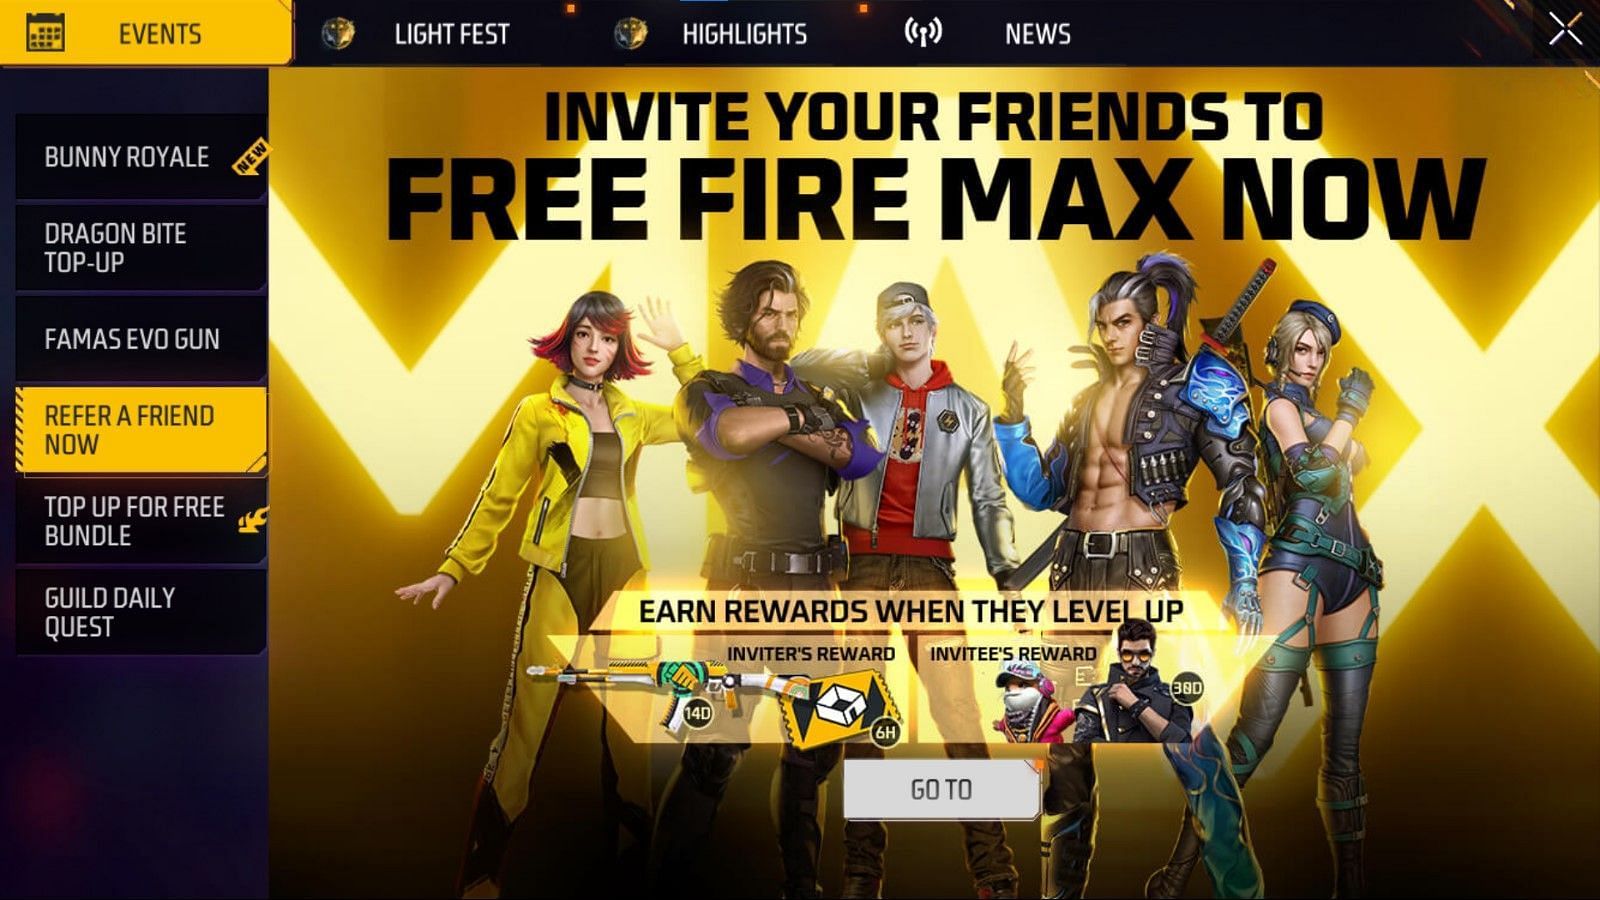 The event is an easy way to get free rewards (Image via Garena)